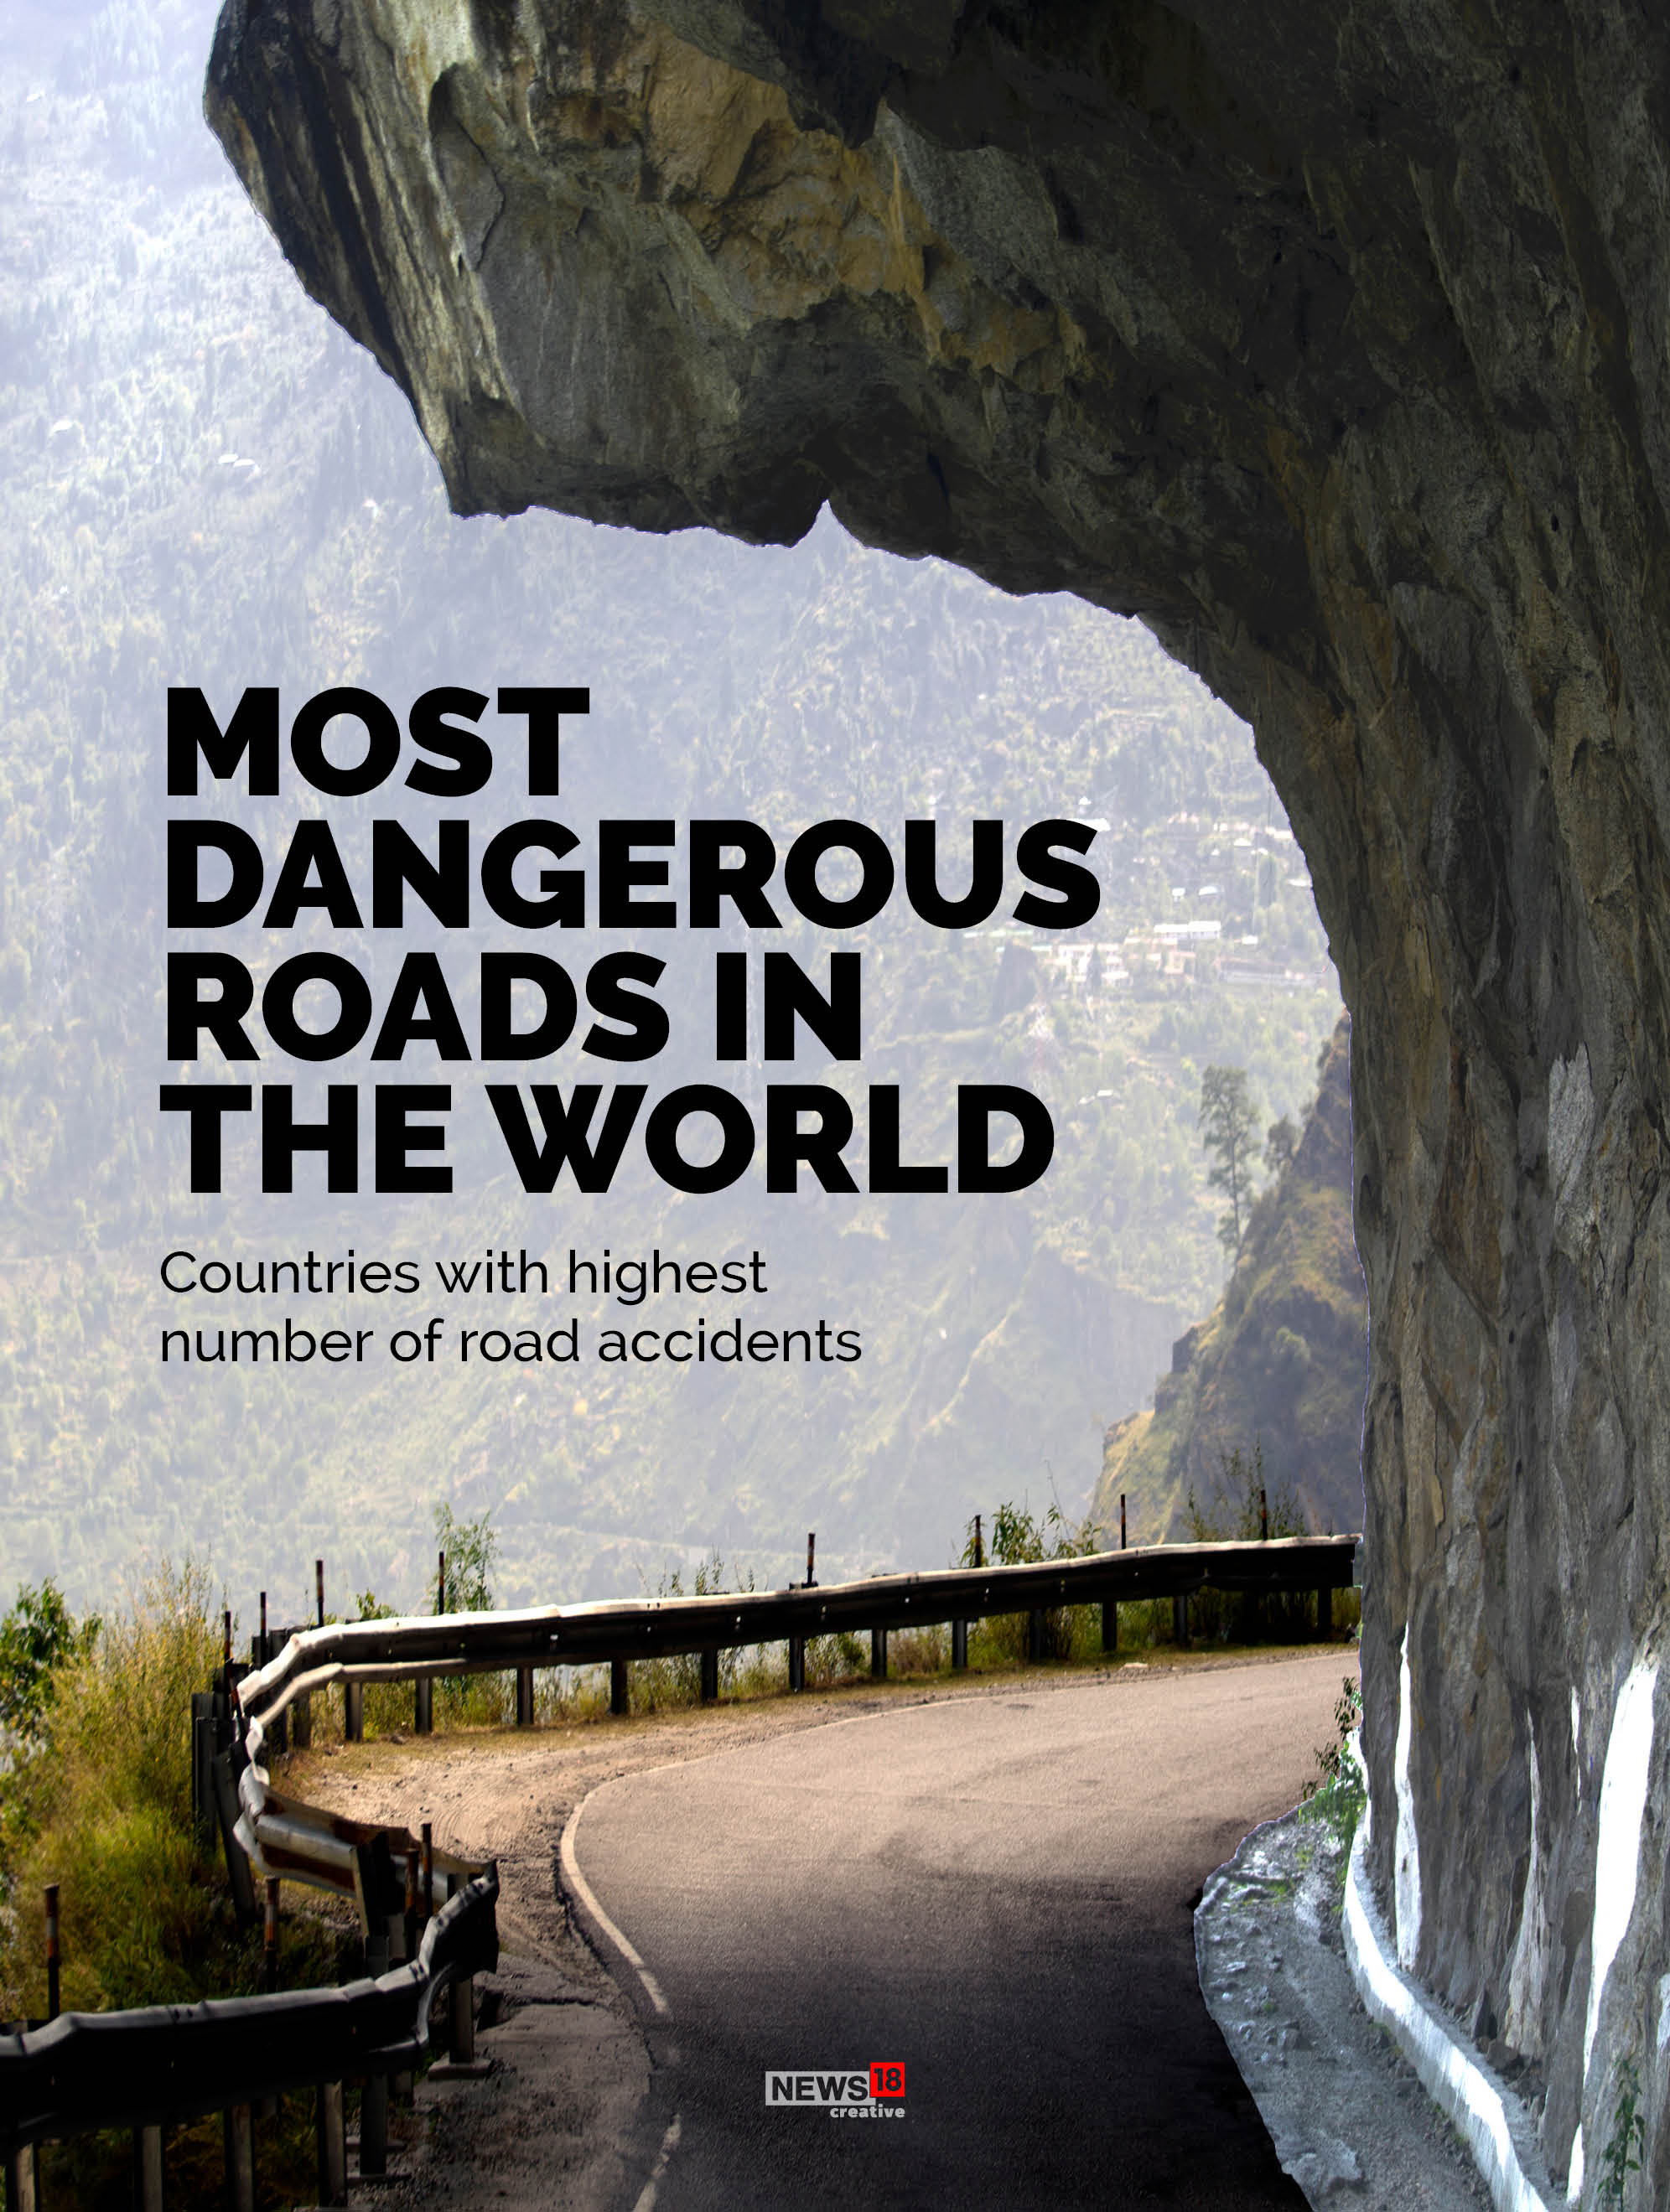 Indian roads are amongst the most dangerous in the world